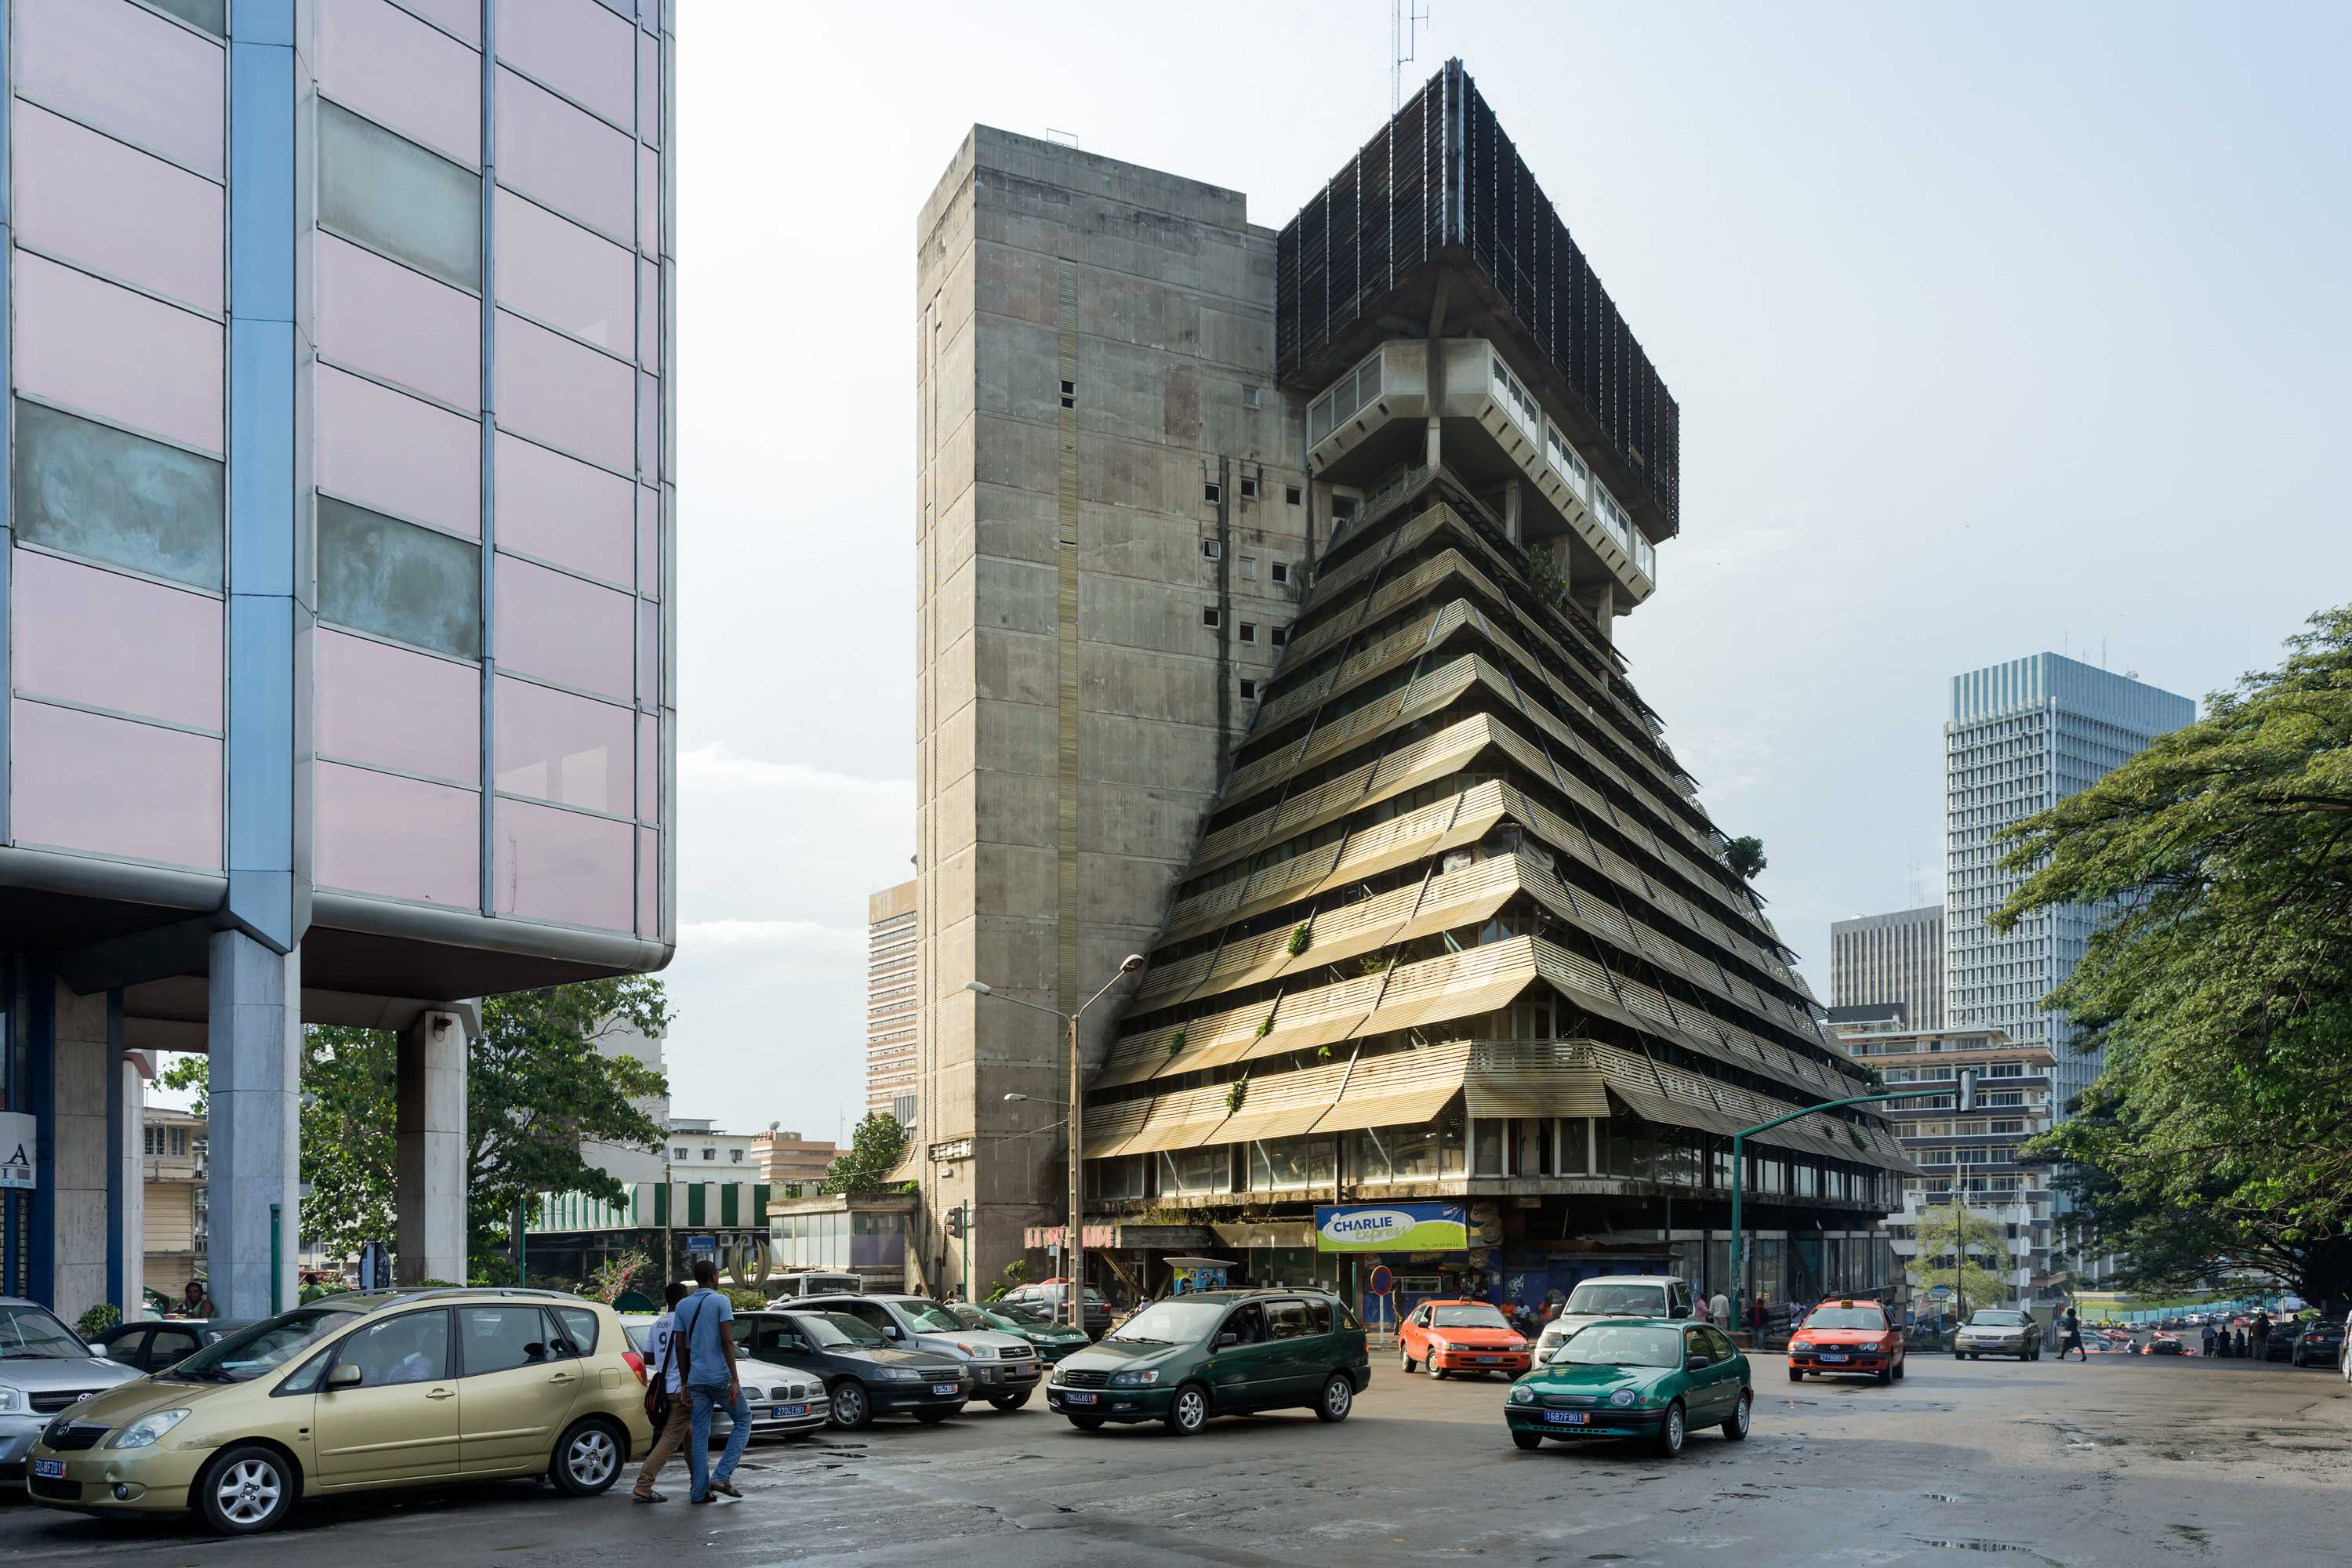 La Pyramide, in Abidjan, Ivory Coast has a pyrimad-like structure with each floor descreasing in size.